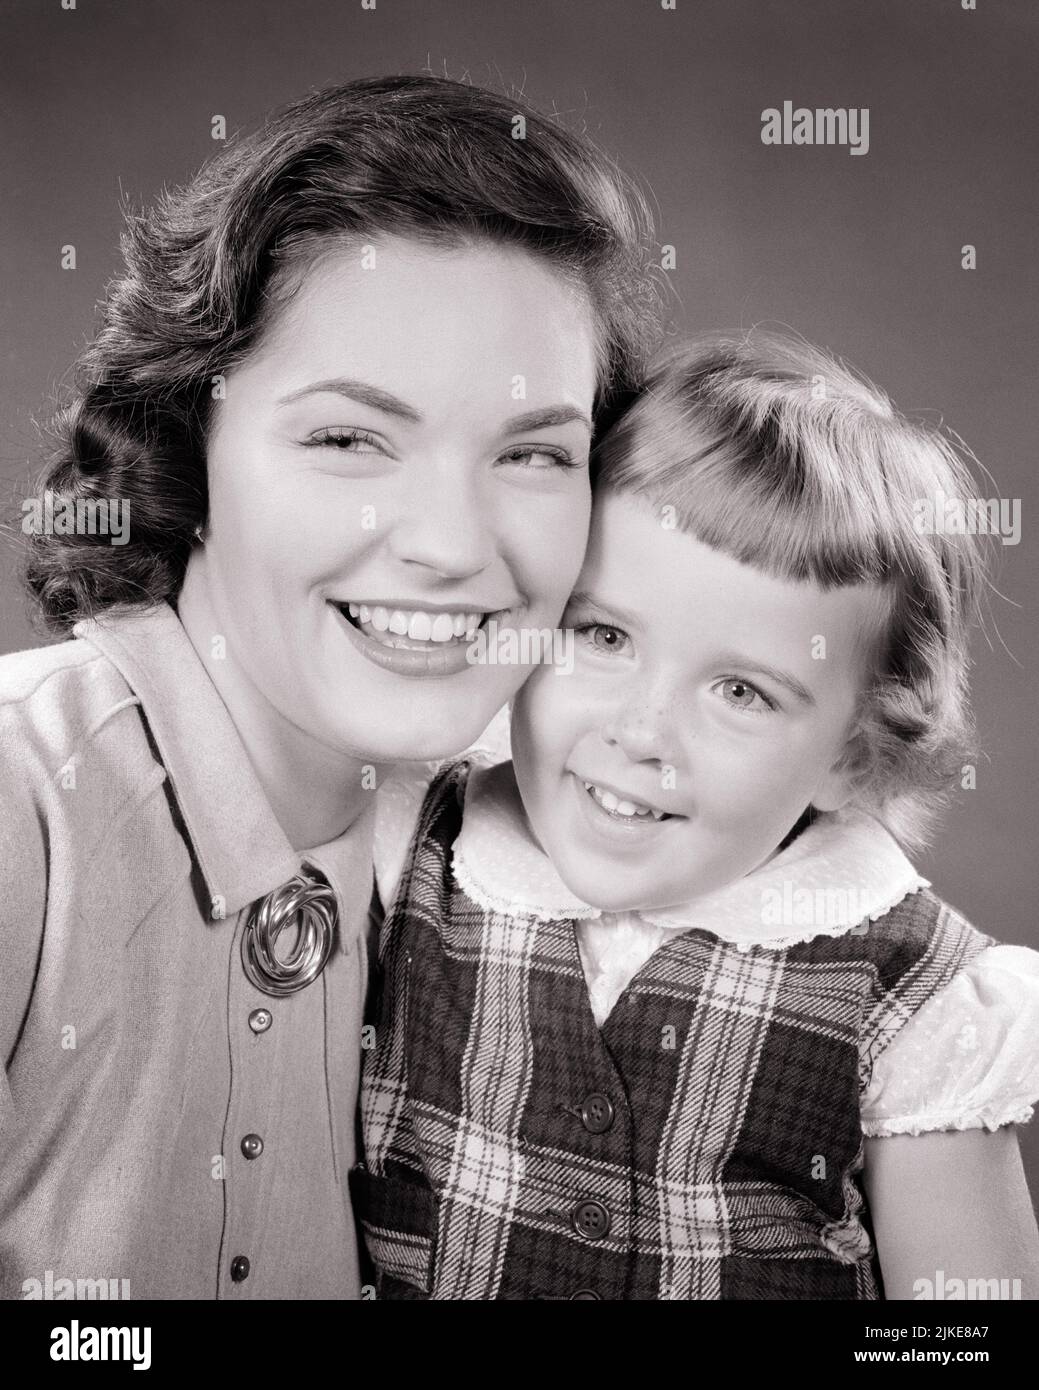 1950s SMILING PORTRAIT OF BRUNETTE MOTHER AND HER DAUGHTER WEARING A PLAID JUMPER WITH WHITE BLOUSE LOOKING OFF CAMERA - j6239 HAR001 HARS JUVENILE YOUNG ADULT PLEASED FAMILIES JOY LIFESTYLE SATISFACTION FEMALES HEALTHINESS HOME LIFE COPY SPACE FRIENDSHIP HALF-LENGTH LADIES DAUGHTERS PERSONS CARING PLAID CONFIDENCE B&W EYE CONTACT BRUNETTE HAPPINESS JUMPER CHEERFUL AND EXCITEMENT PRIDE BLOUSE SMILES STILL LIFE CHEEK TO CHEEK JOYFUL SUPPORT GROWTH JUVENILES MOMS TOGETHERNESS YOUNG ADULT WOMAN BLACK AND WHITE CAUCASIAN ETHNICITY HAR001 OLD FASHIONED Stock Photo